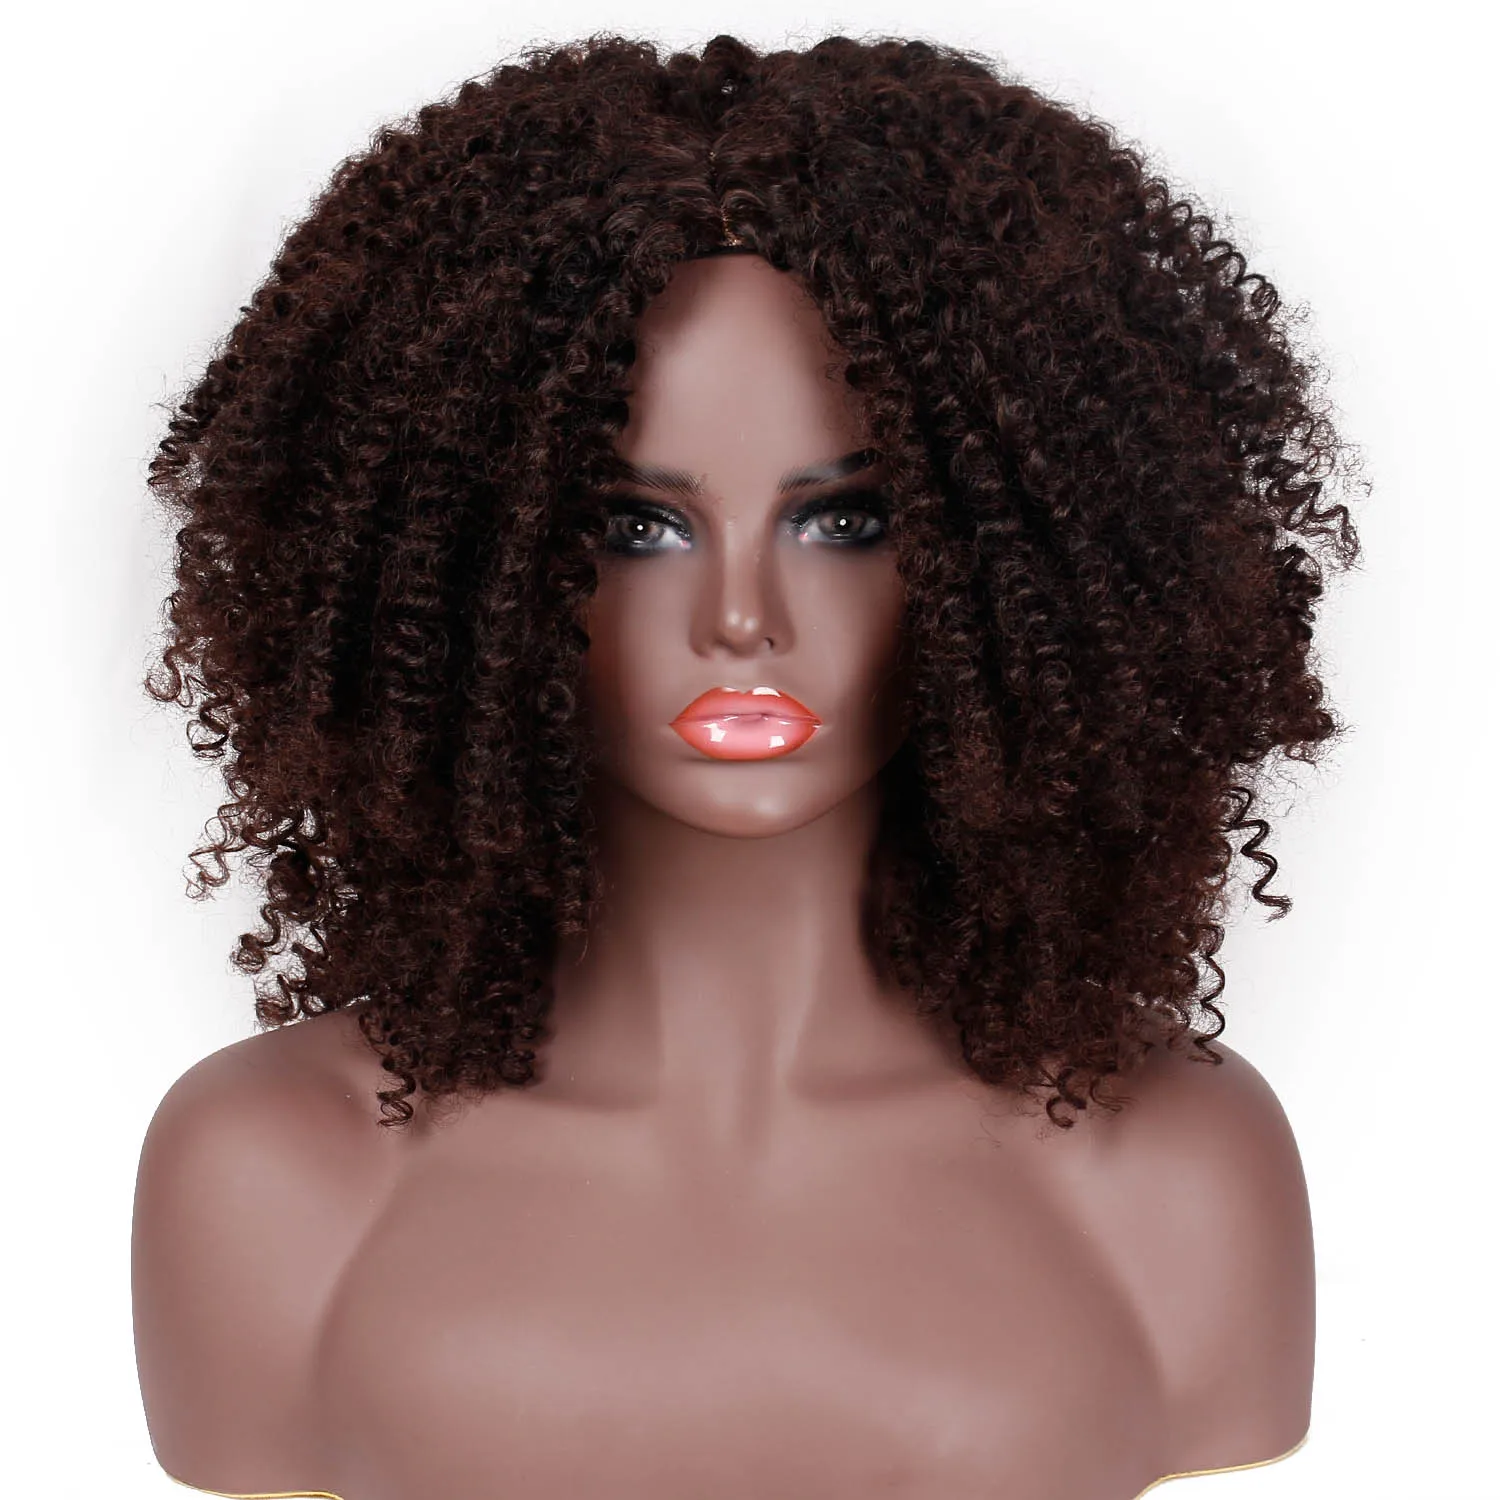 

15''Short Hair Afro Kinky Curly Wig With Bangs For Black Women Cosplay Lolita Synthetic Natural Glueless Brown Mixed Blonde Wigs